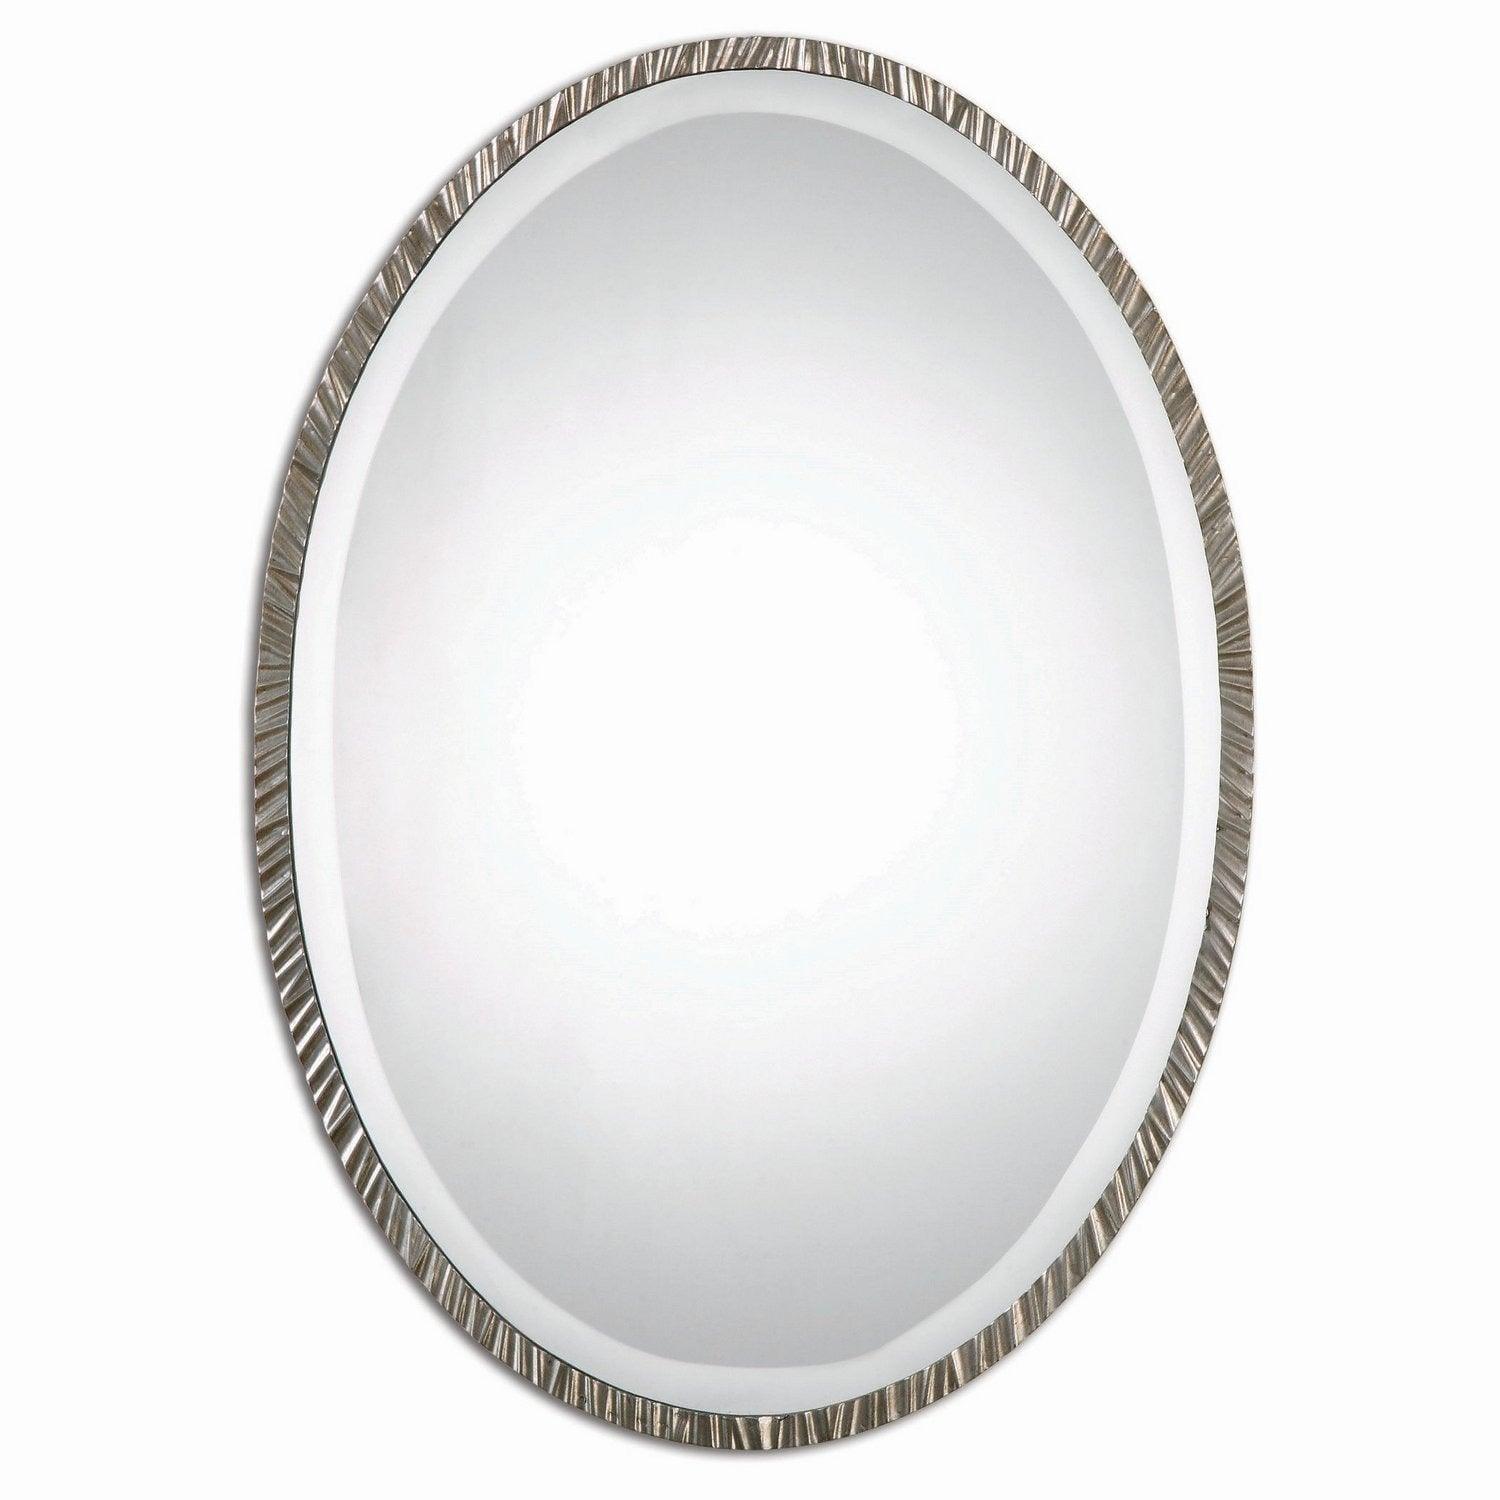 The Uttermost - Annadel Oval Mirror - 12924 | Montreal Lighting & Hardware